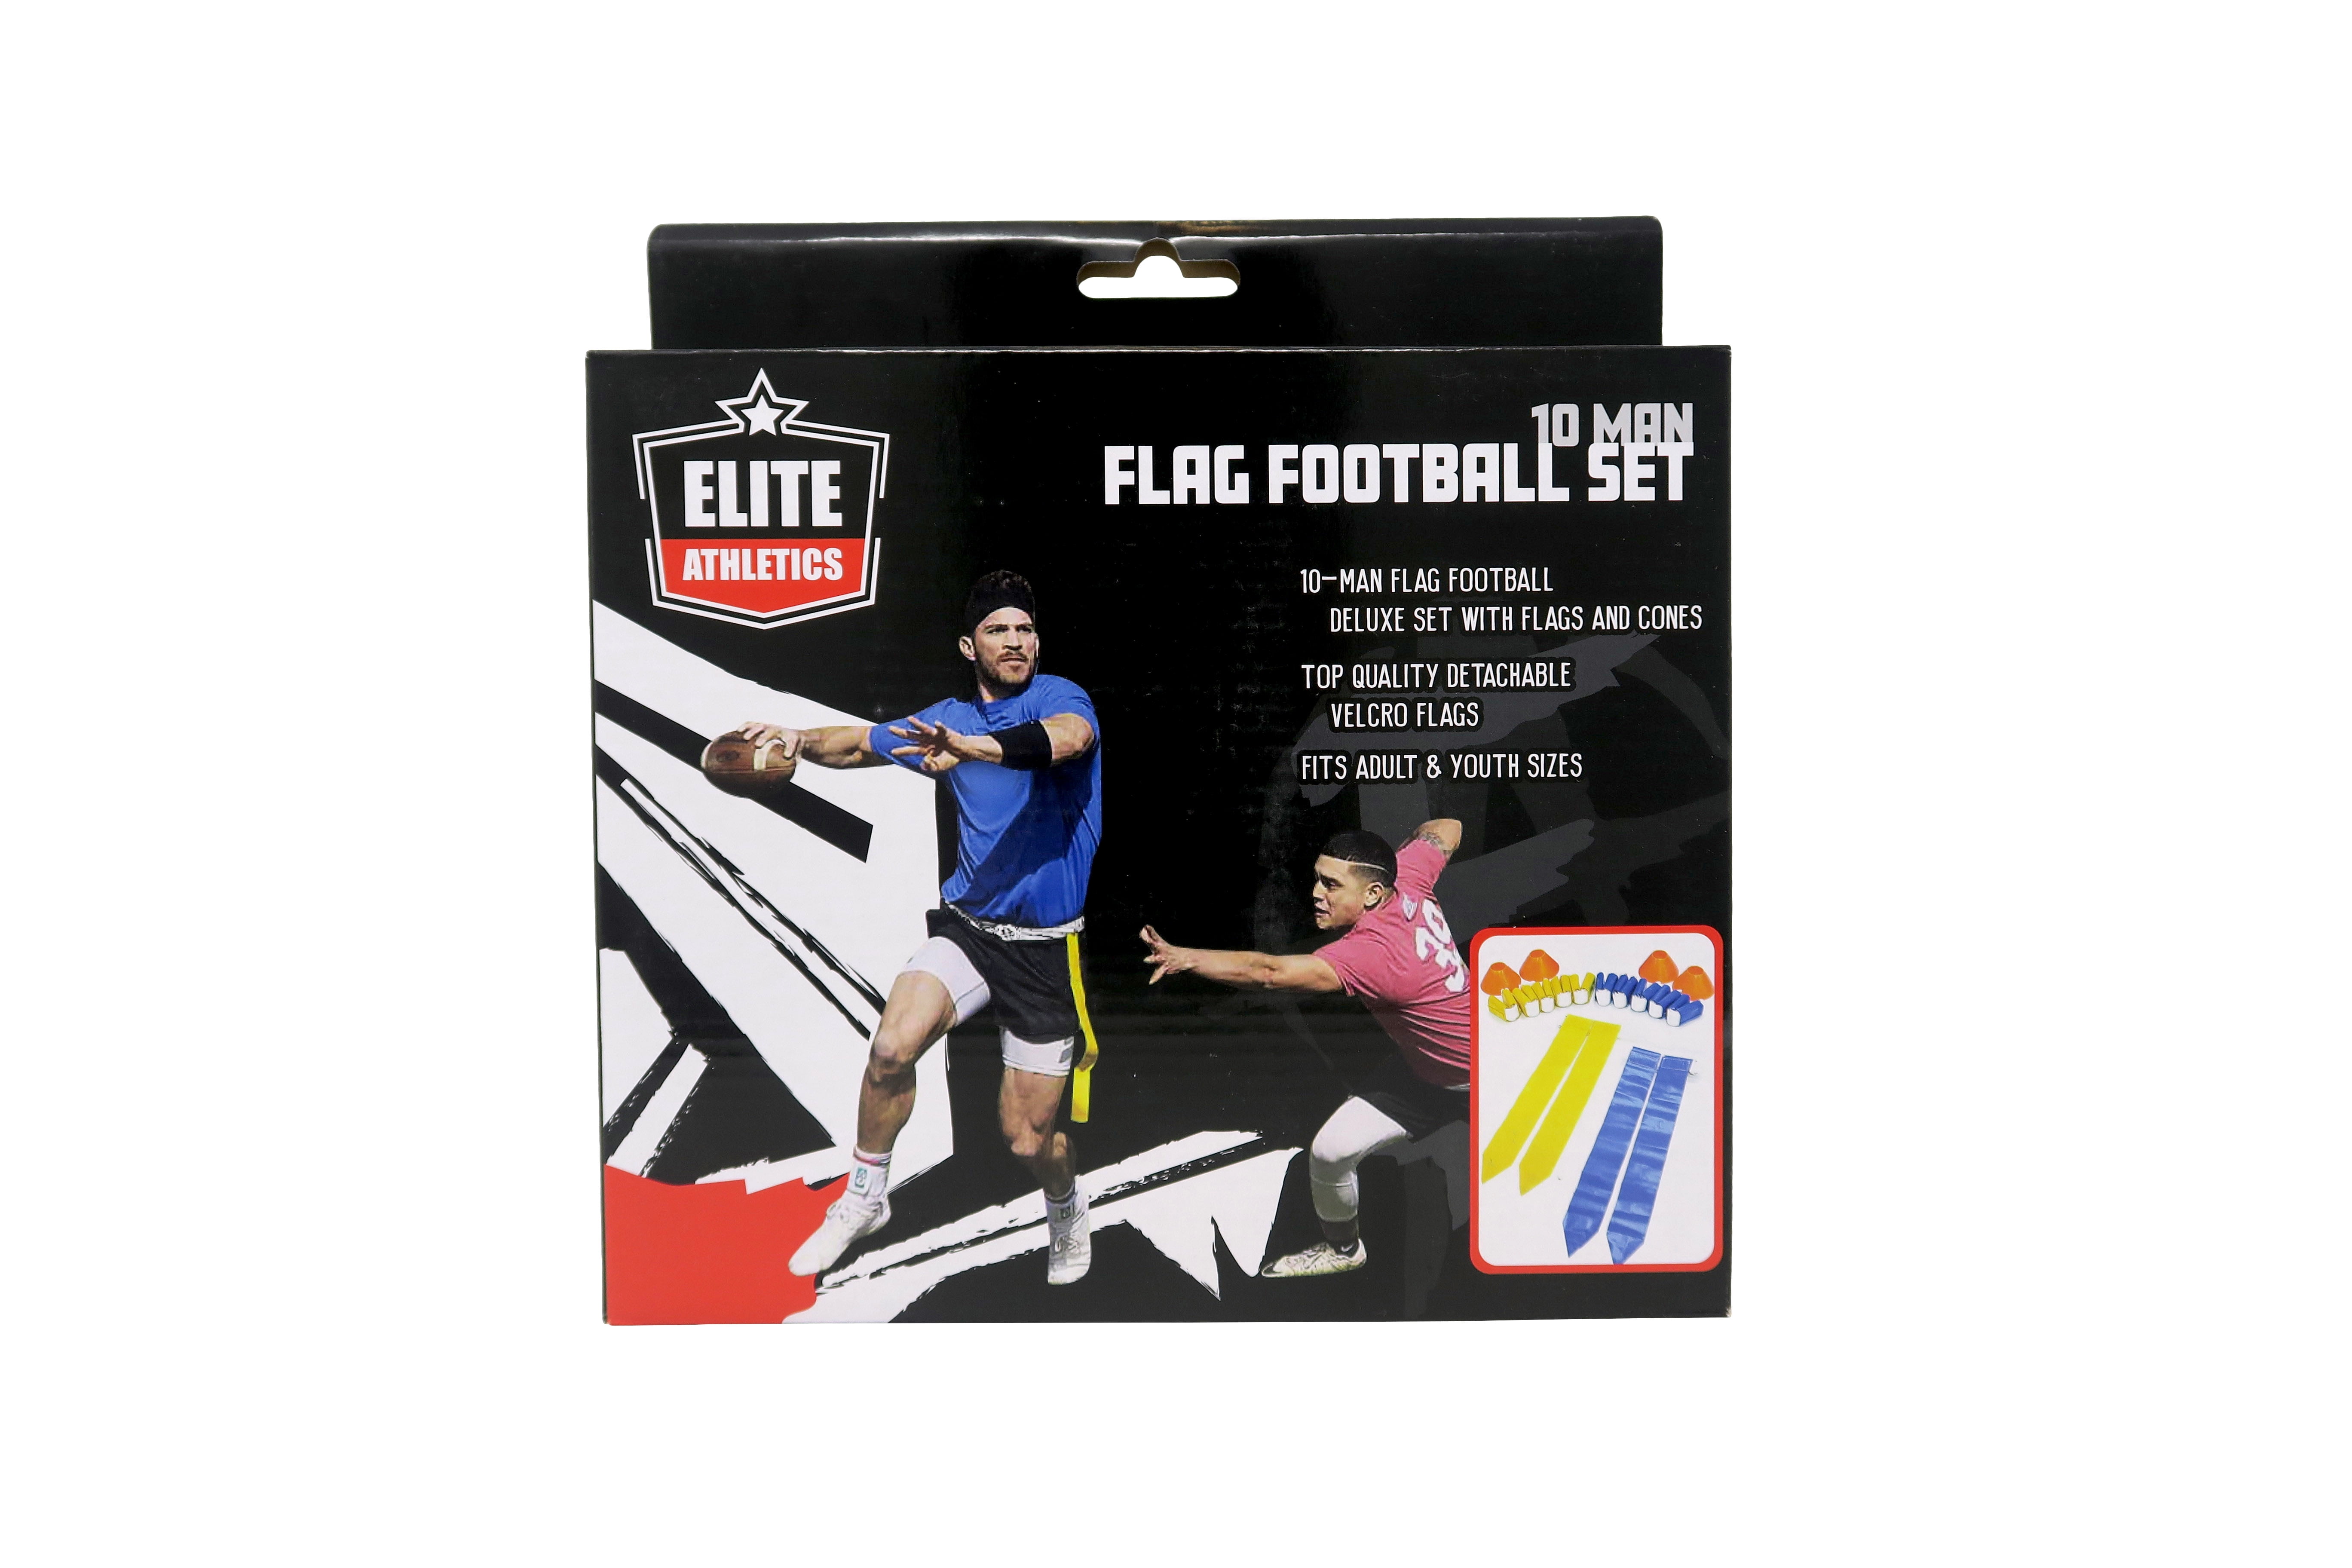 Elite Athletics 10 Man Flag Football Set for Adults and Youth w/ Flags and Cones 